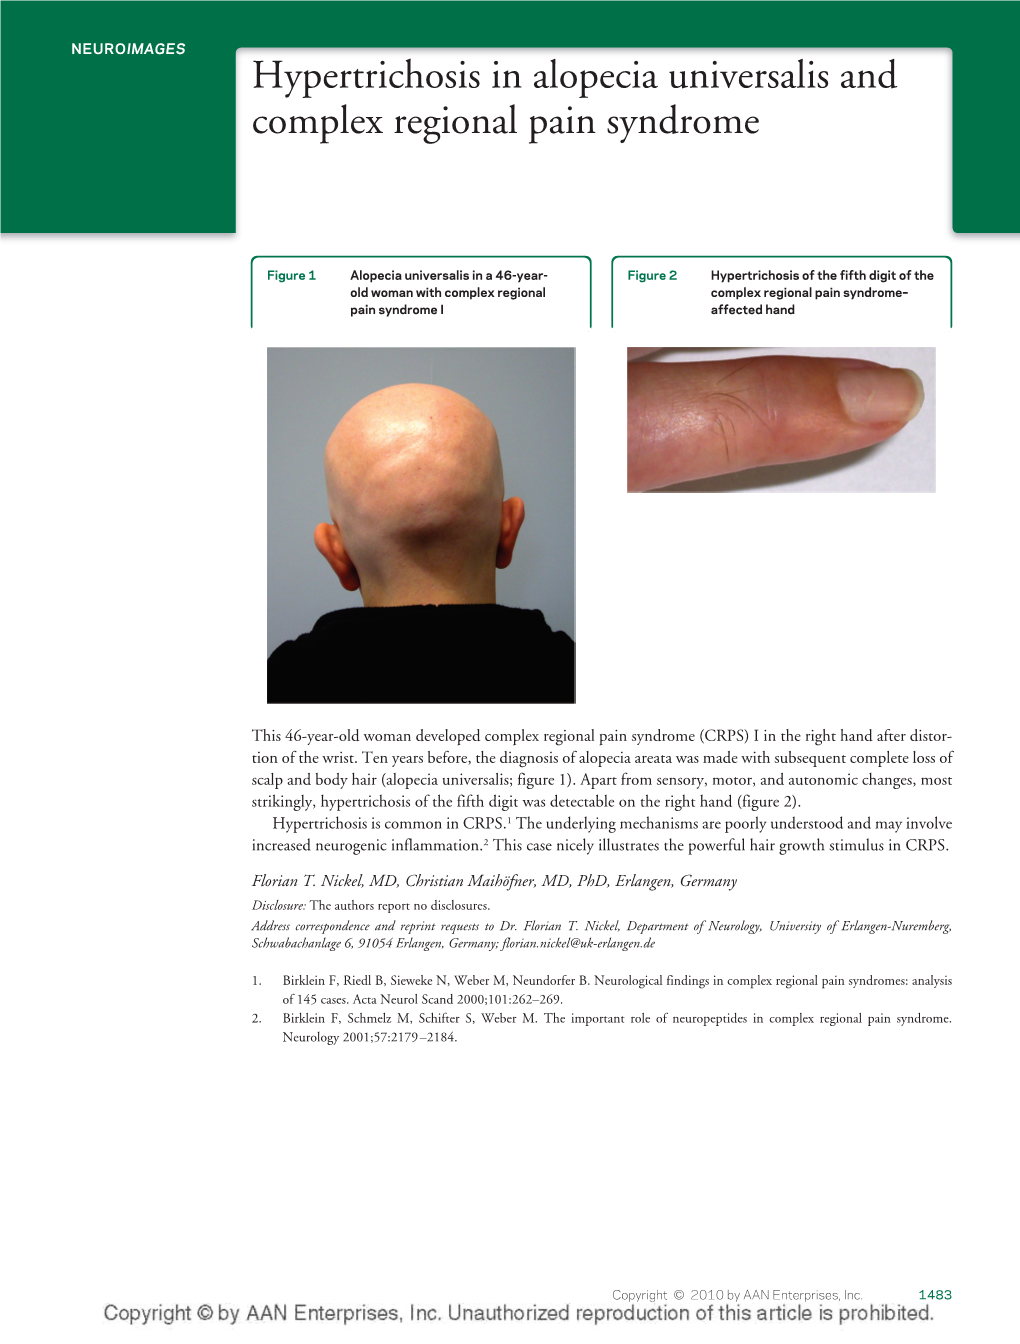 Hypertrichosis in Alopecia Universalis and Complex Regional Pain Syndrome